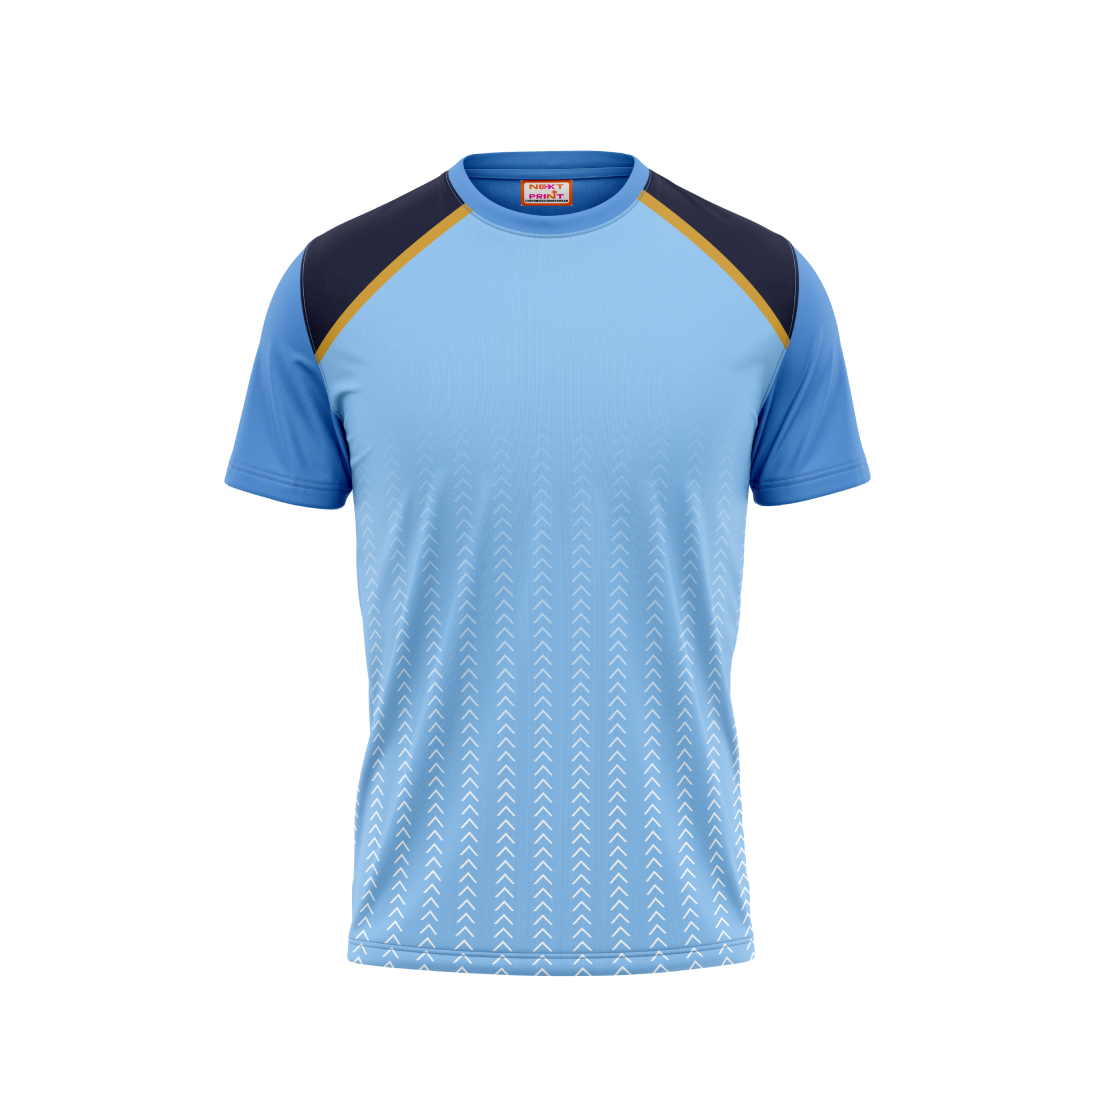 Round Neck Printed Jersey Skyblue NP00186